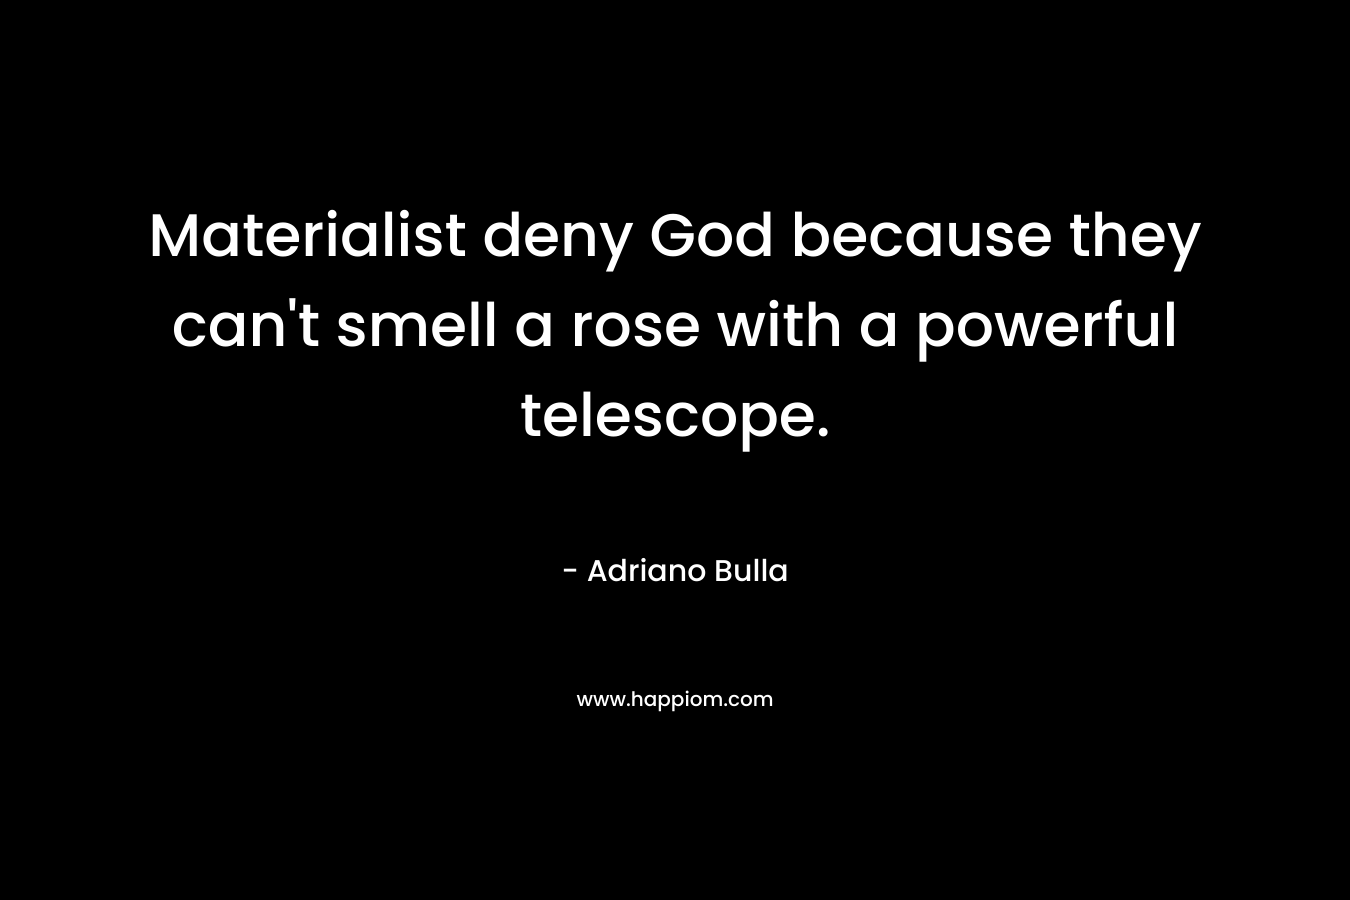 Materialist deny God because they can’t smell a rose with a powerful telescope. – Adriano Bulla